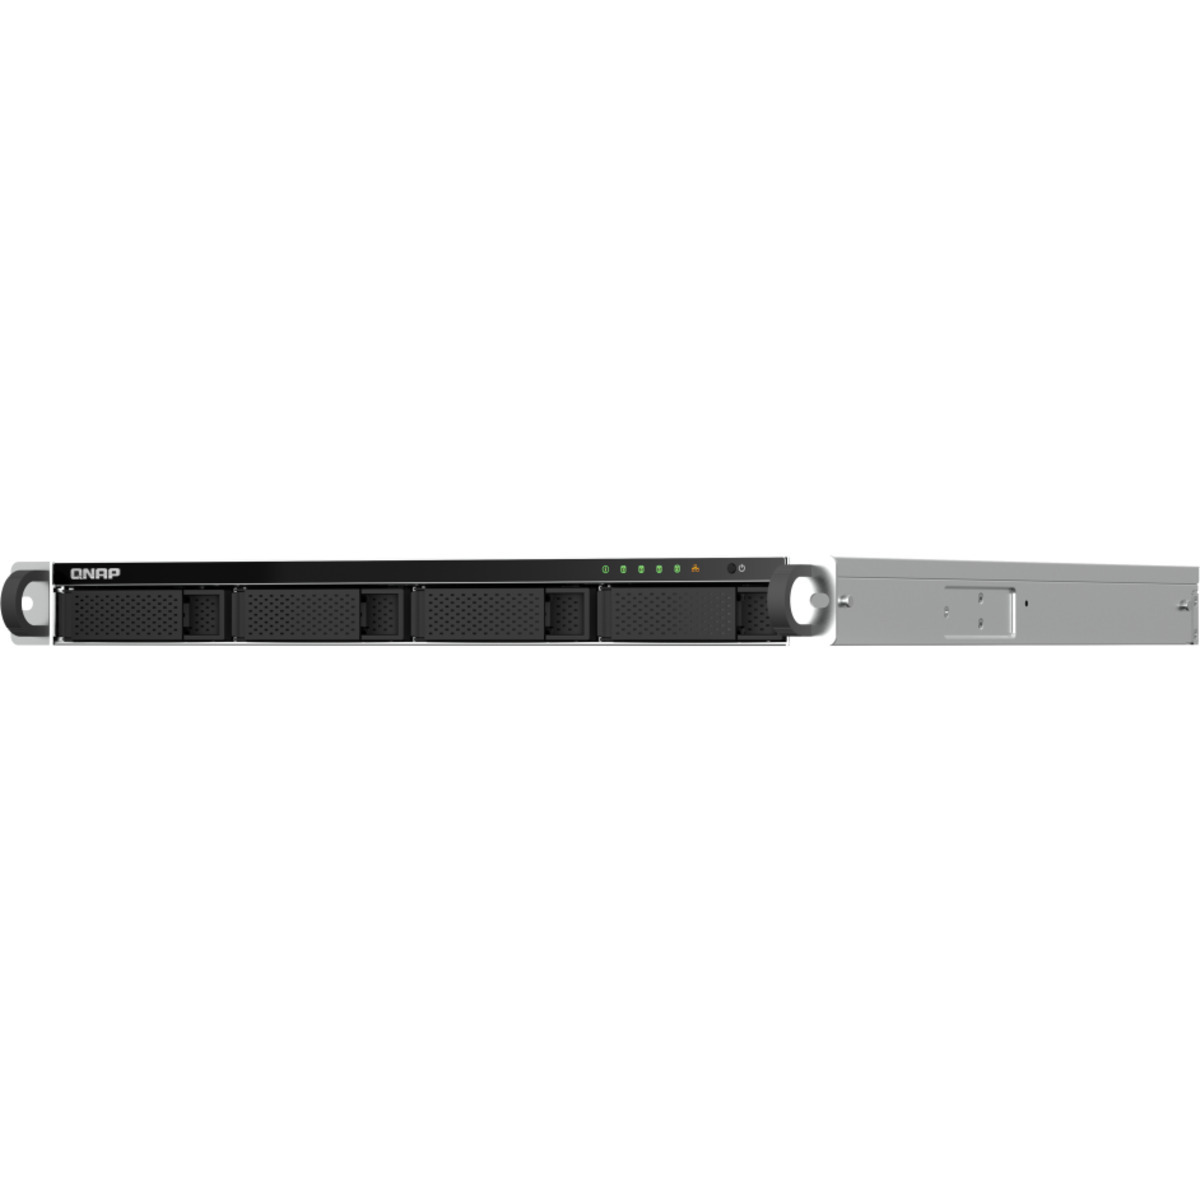 buy $2089 QNAP TS-464U 24tb RackMount NAS - Network Attached Storage Device 4x6000gb Seagate IronWolf Pro ST6000NT001 3.5 7200rpm SATA 6Gb/s HDD NAS Class Drives Installed - Burn-In Tested - FREE RAM UPGRADE - nas headquarters buy network attached storage server device das new raid-5 free shipping simply usa TS-464U